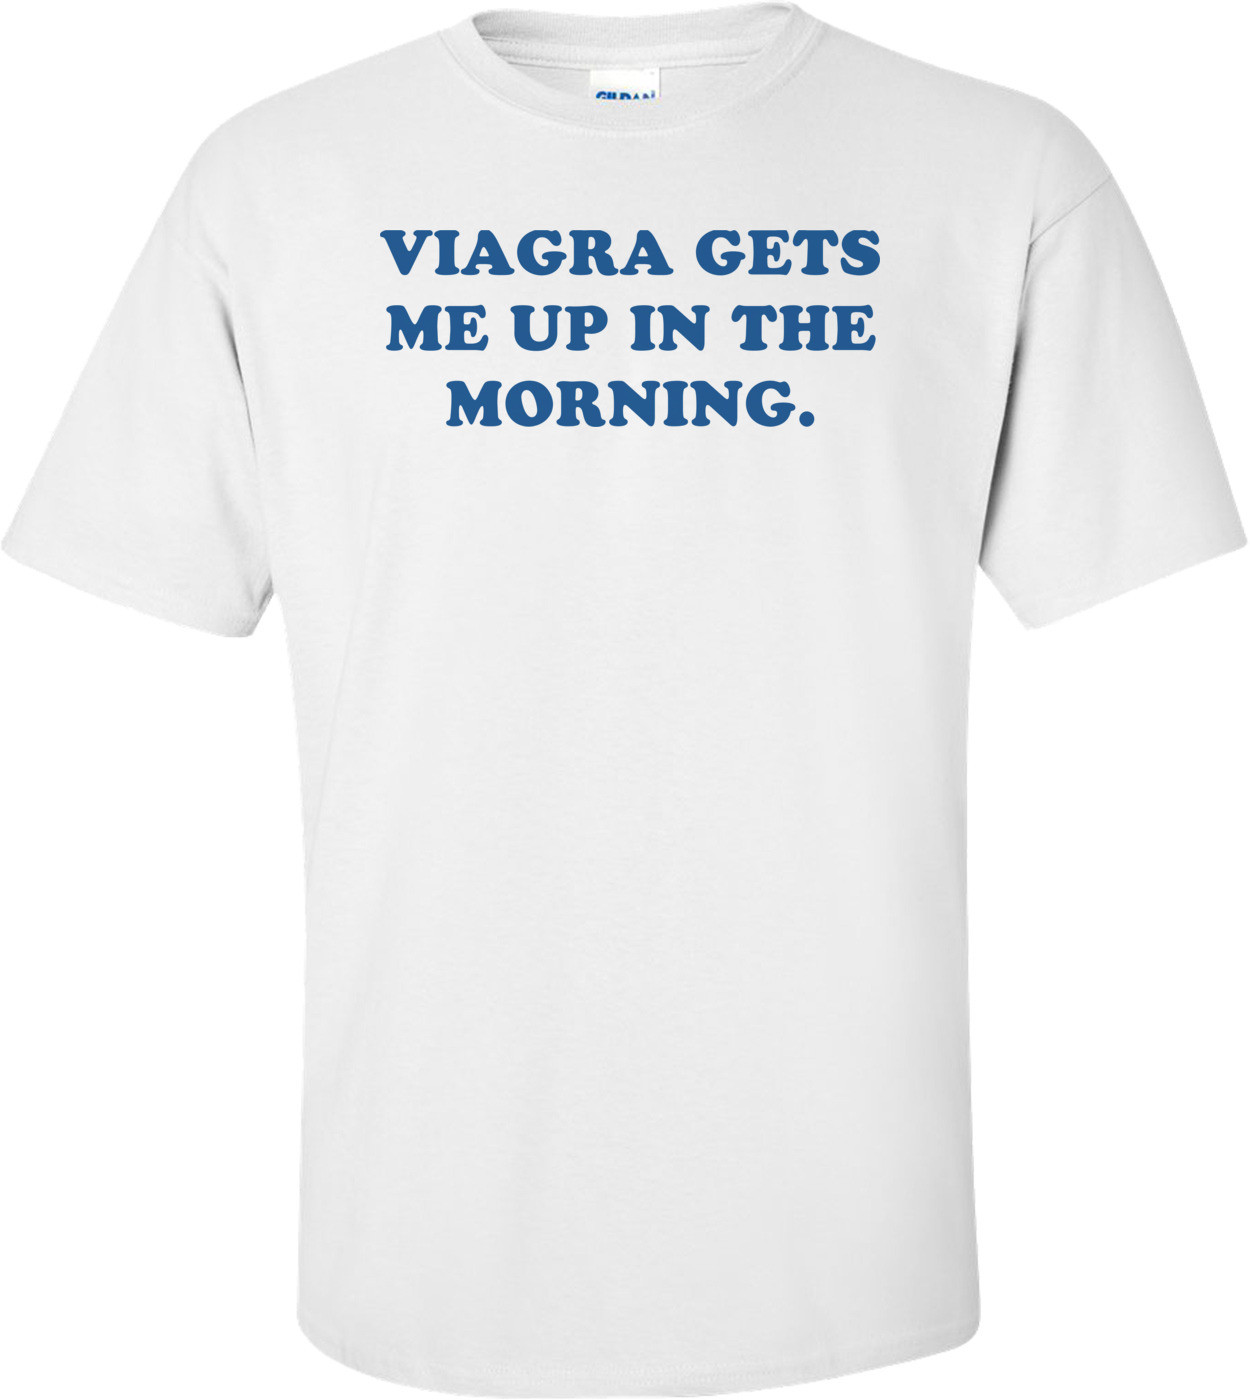 VIAGRA GETS ME UP IN THE MORNING. Shirt